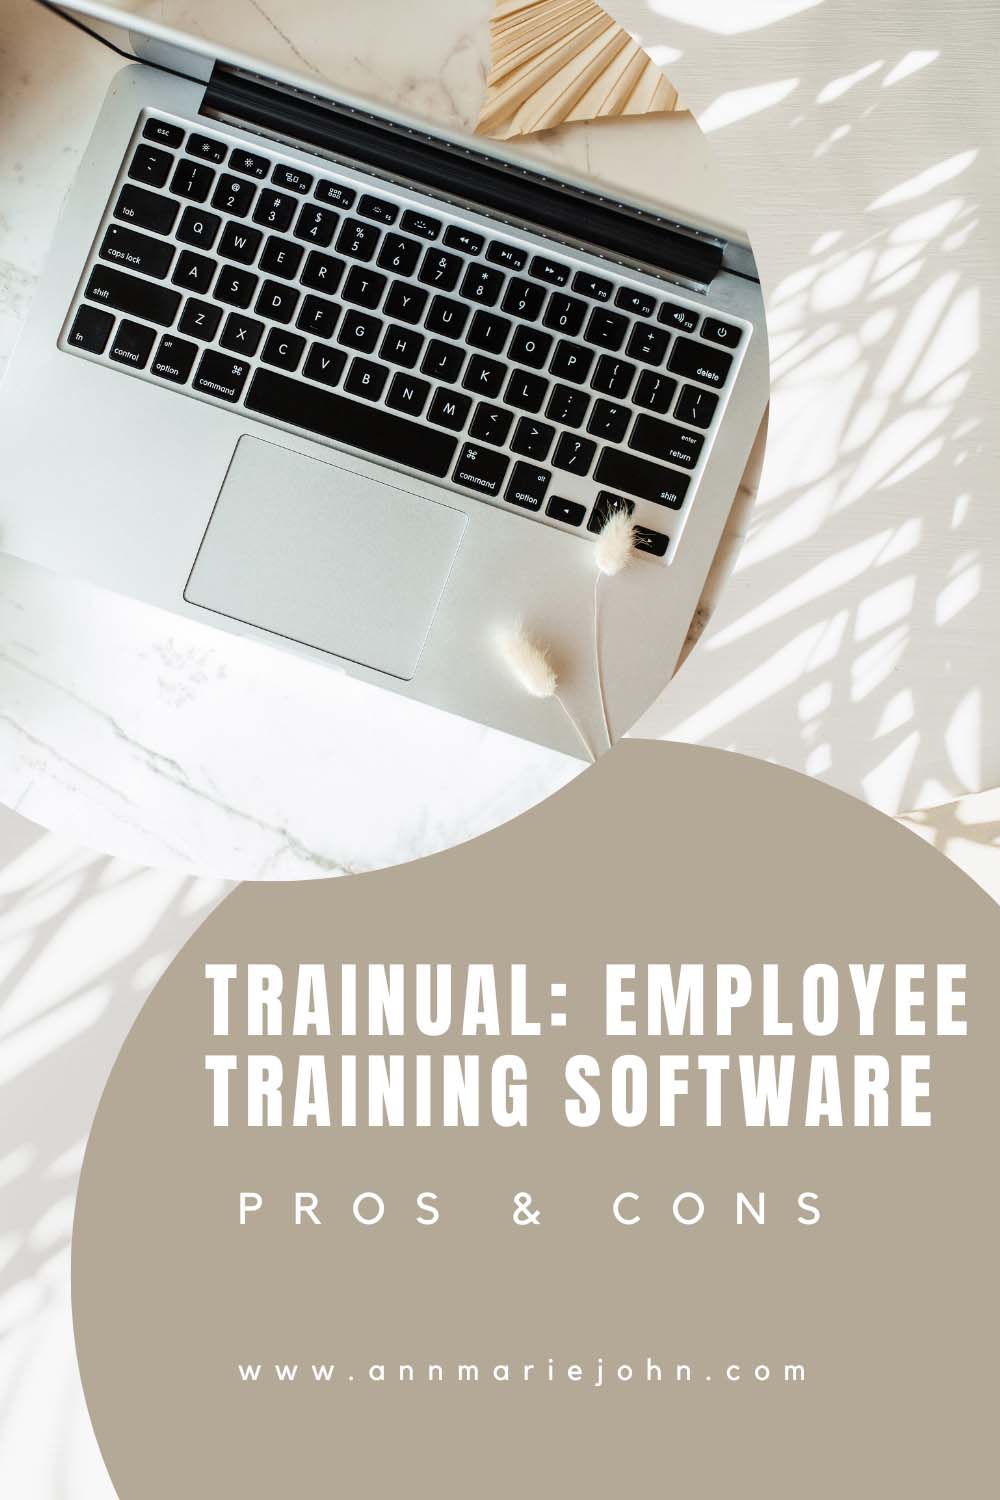 Trainual Employee Training Software: Pros and Cons